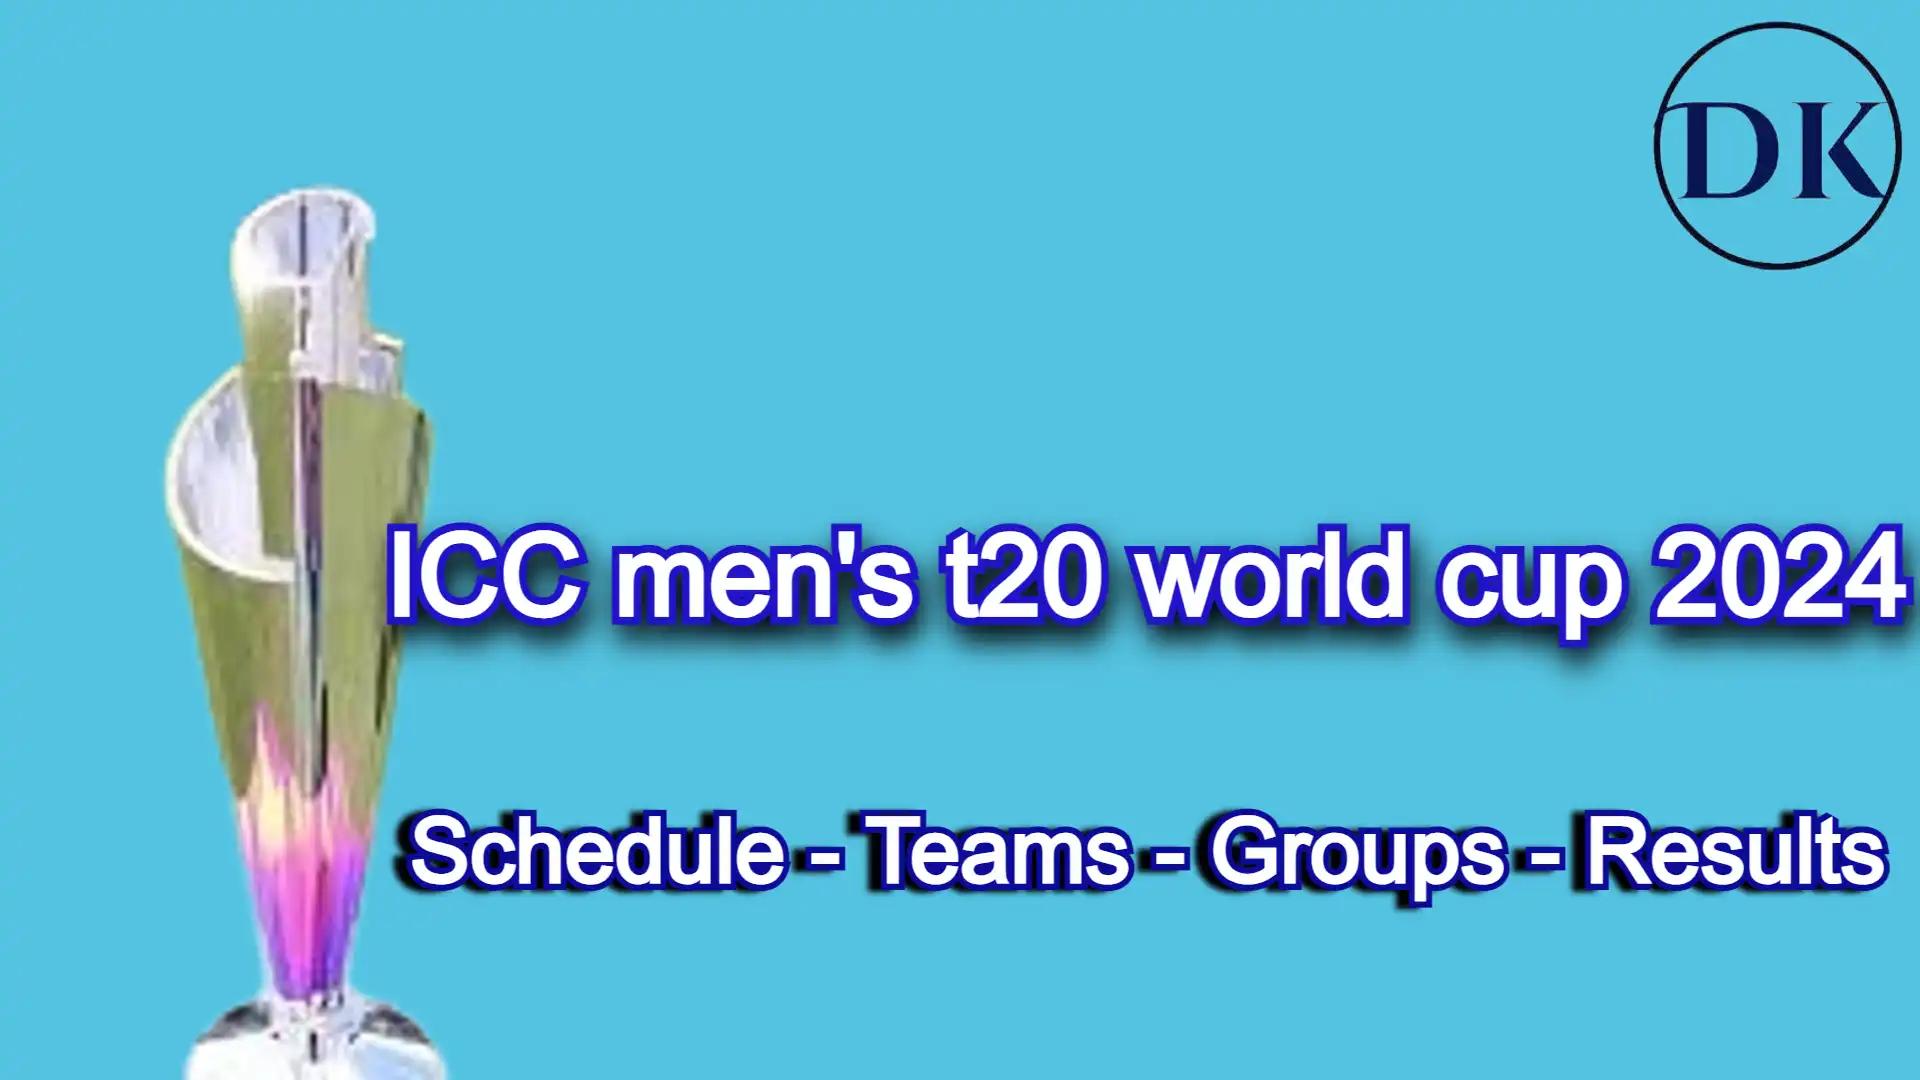 ICC men's t20 world cup 2024 schedule, Teams, Groups, Results